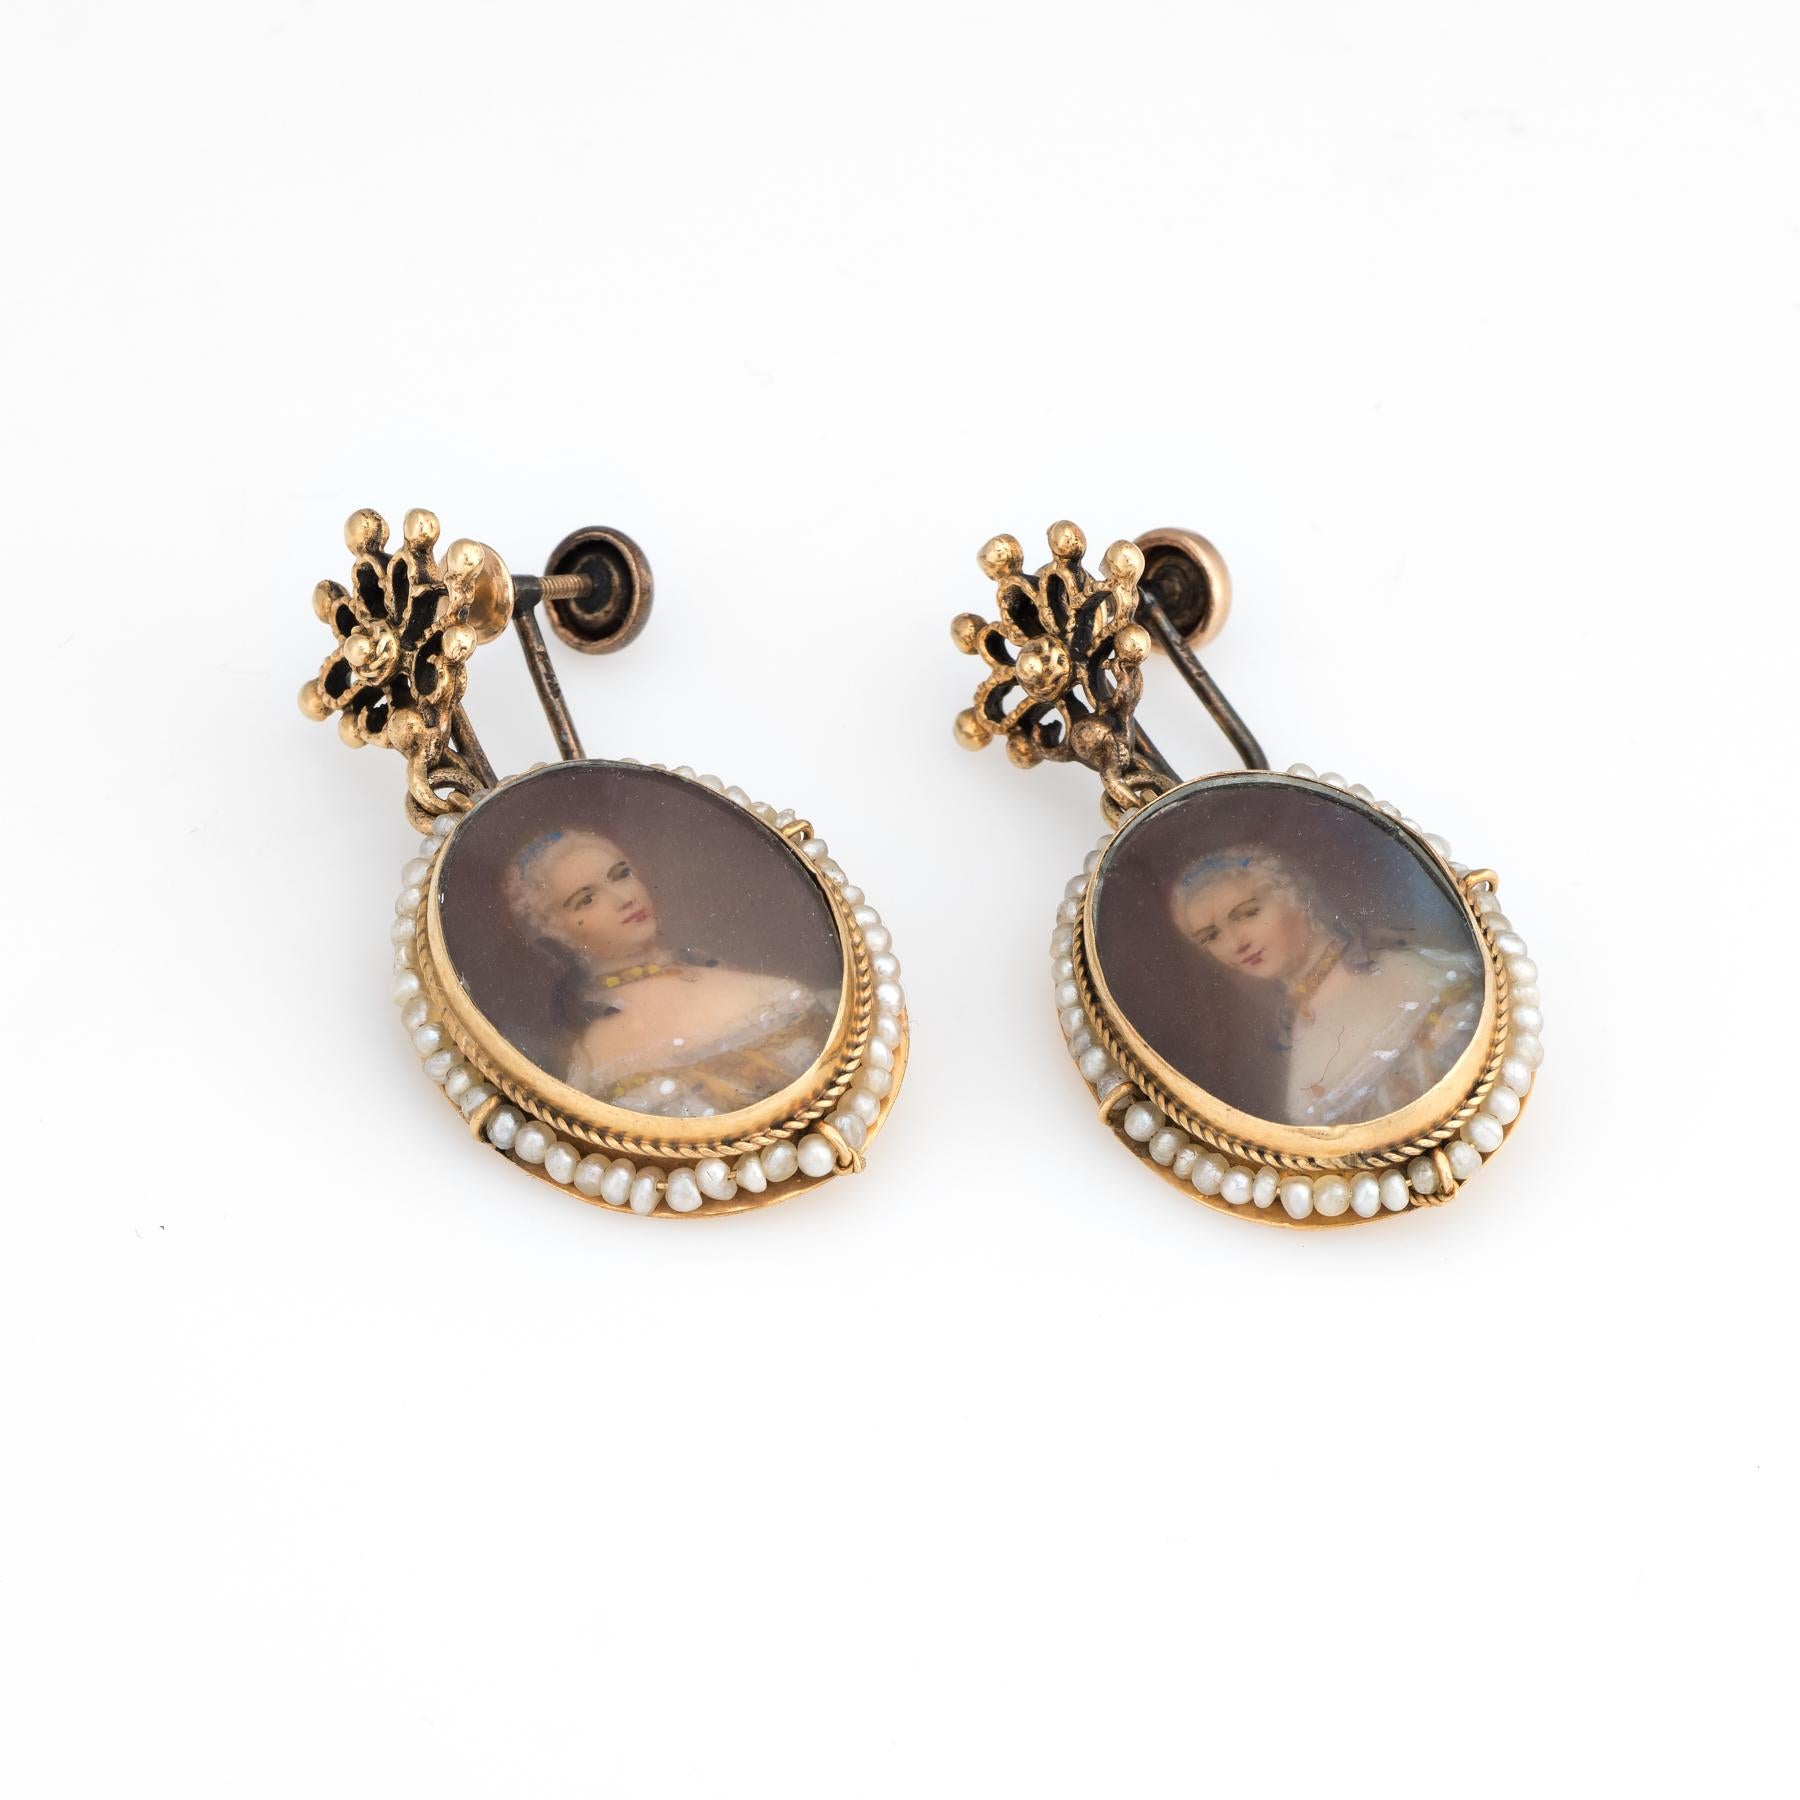 Elegant pair of vintage earrings (circa 1950s to 1960s), crafted in 14k yellow gold. 

The earrings feature a hand painted portrait of a Victorian woman on porcelain measuring 20mm x 15mm. Framing each portrait is seed pearls secured on a wire